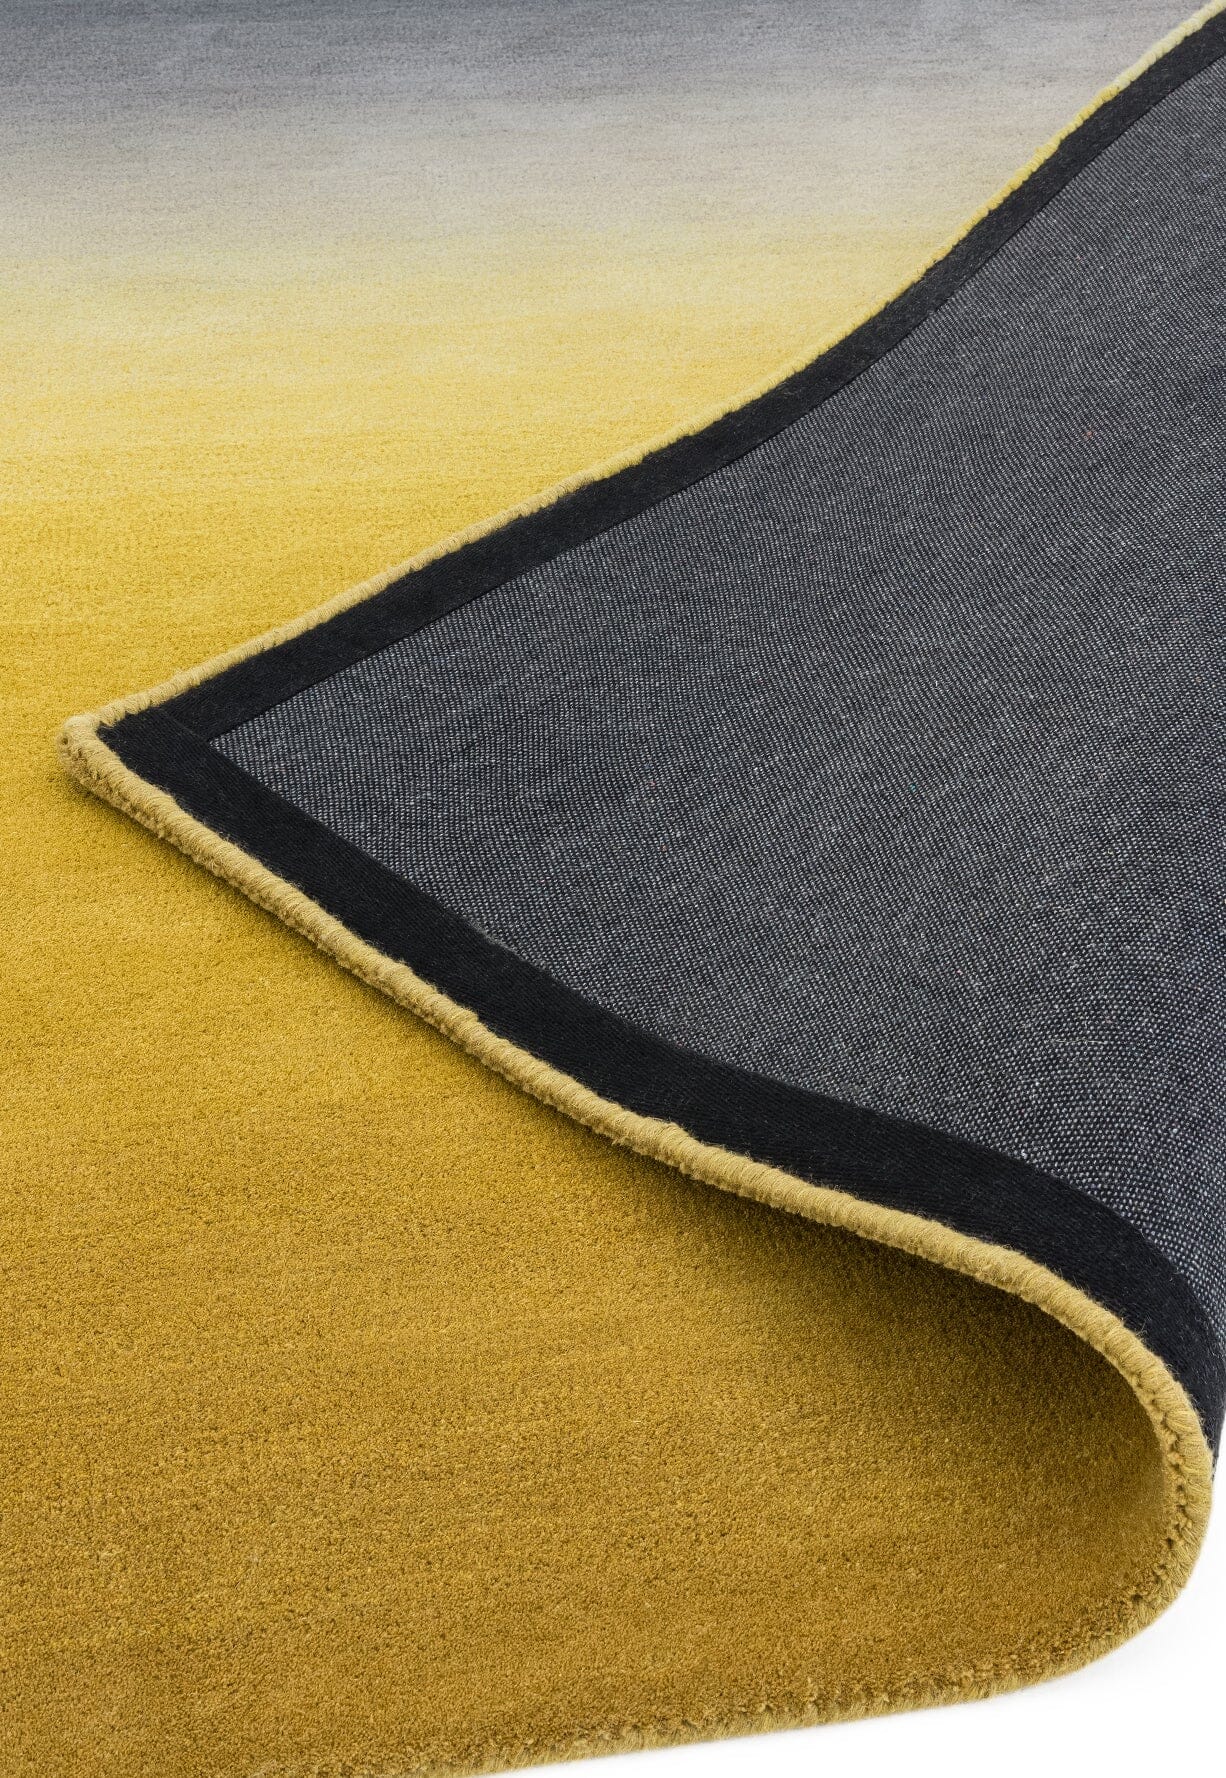  Asiatic Carpets-Asiatic Carpets Ombre Hand Tufted Rug Mustard - 120 x 170cm-Yellow, Gold 181 